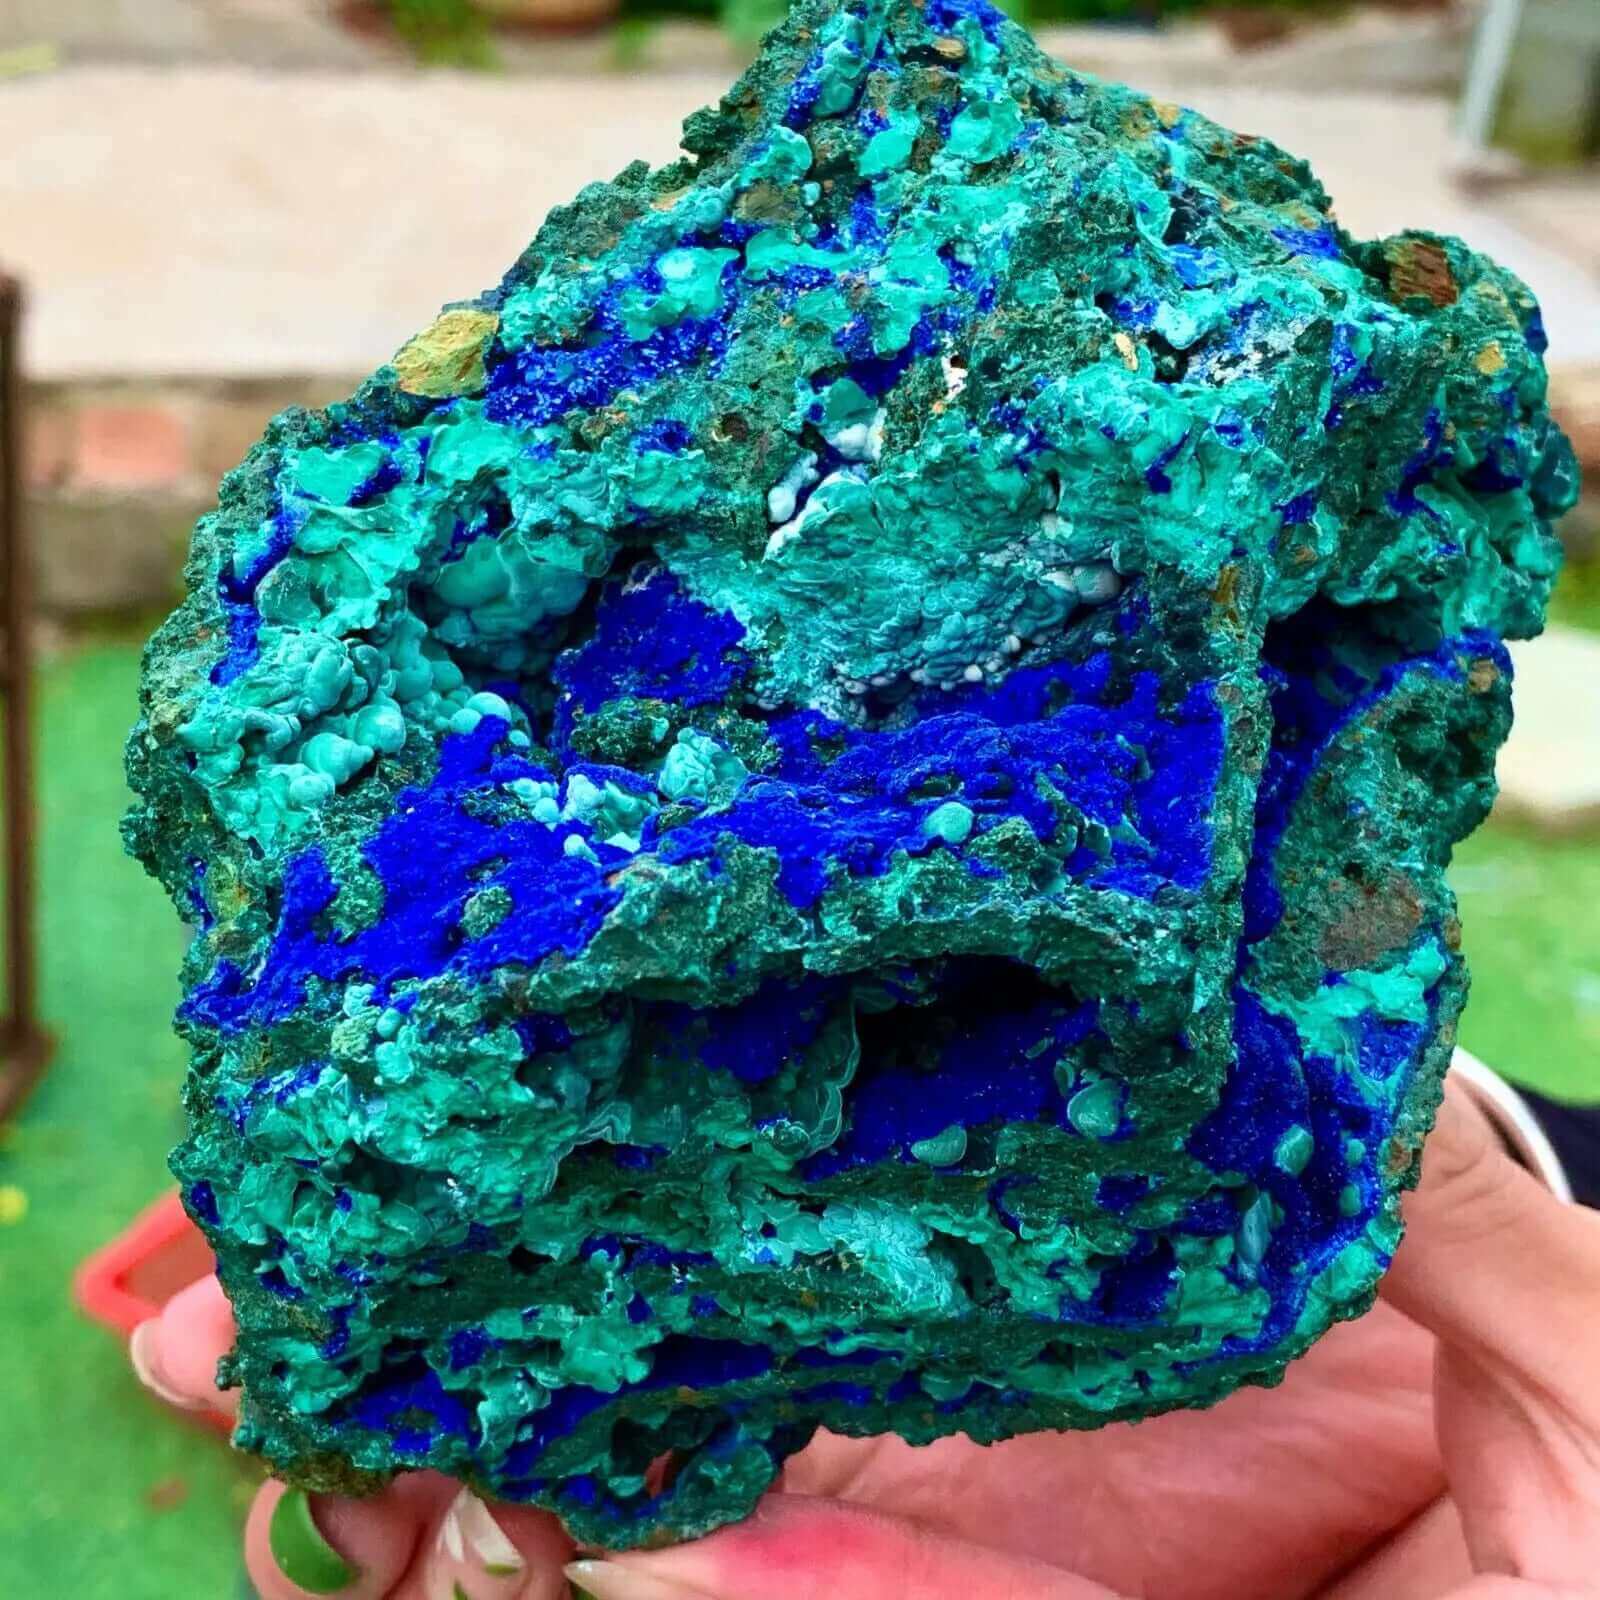 You will find Natural Azurite Malachite, £90.0 on www.nauradika.com in our collection: Loose Stones